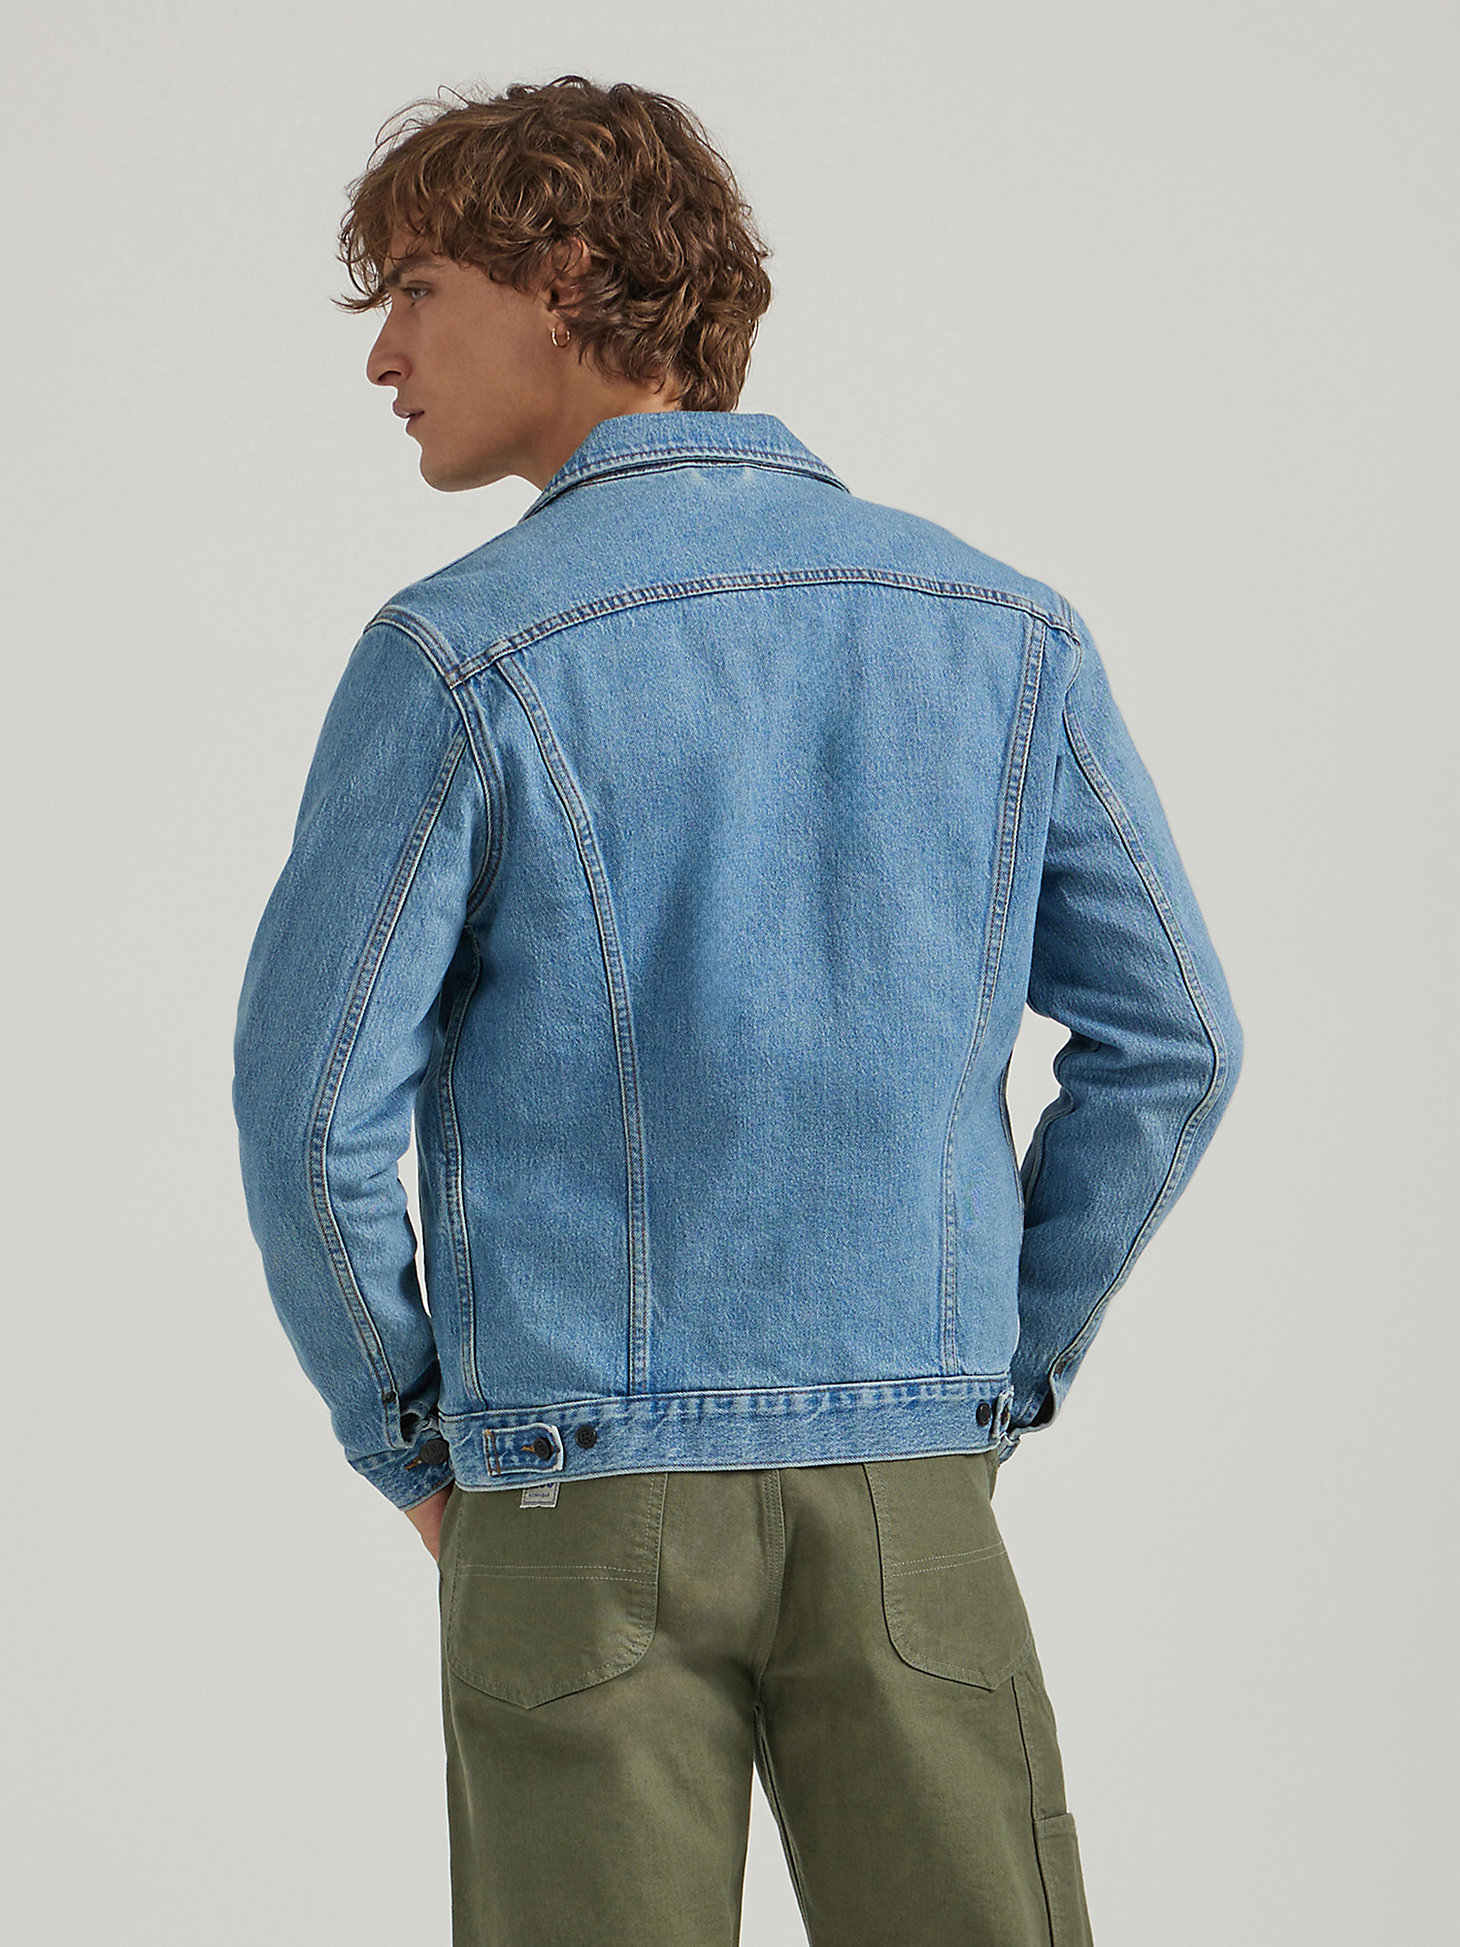 Men's Essential Relaxed Fit Rider™ Jacket in Downtown alternative view 1